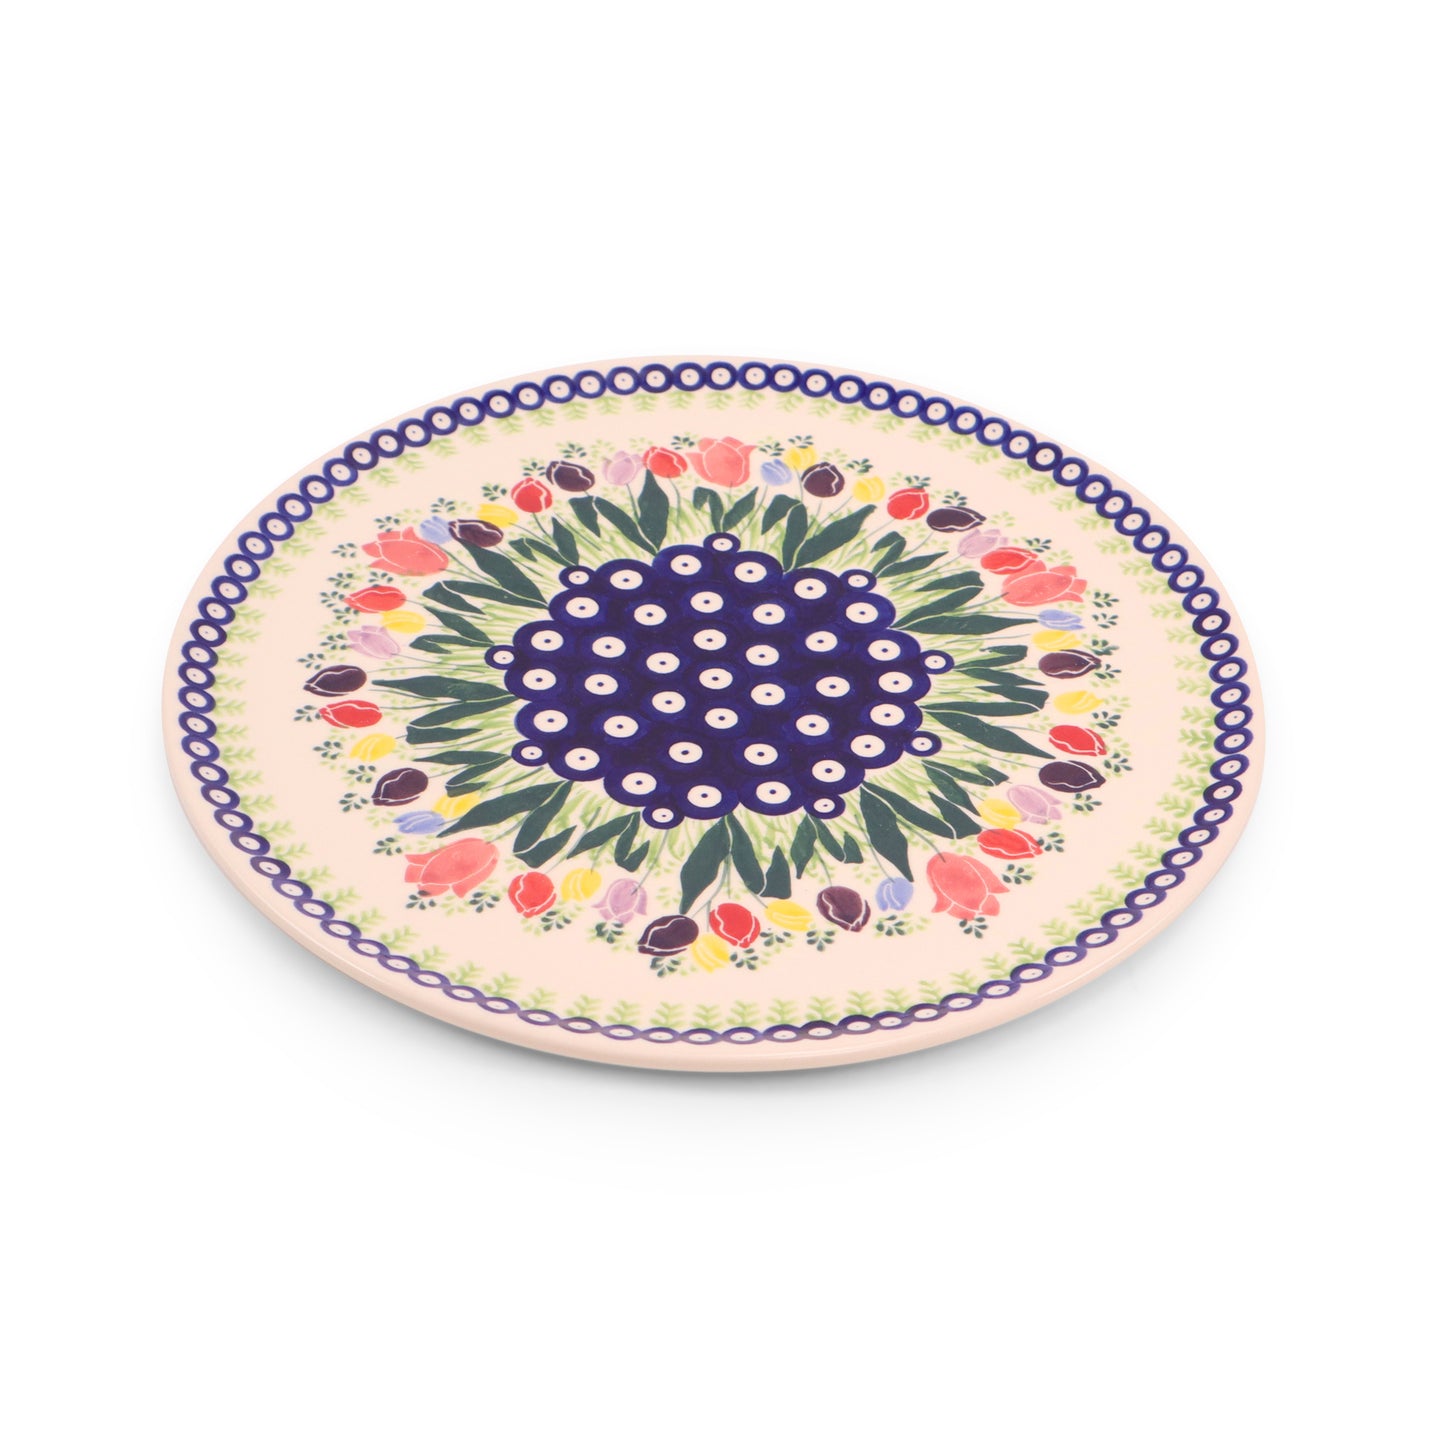 12" Pizza Plate. Pattern: Tulip Time